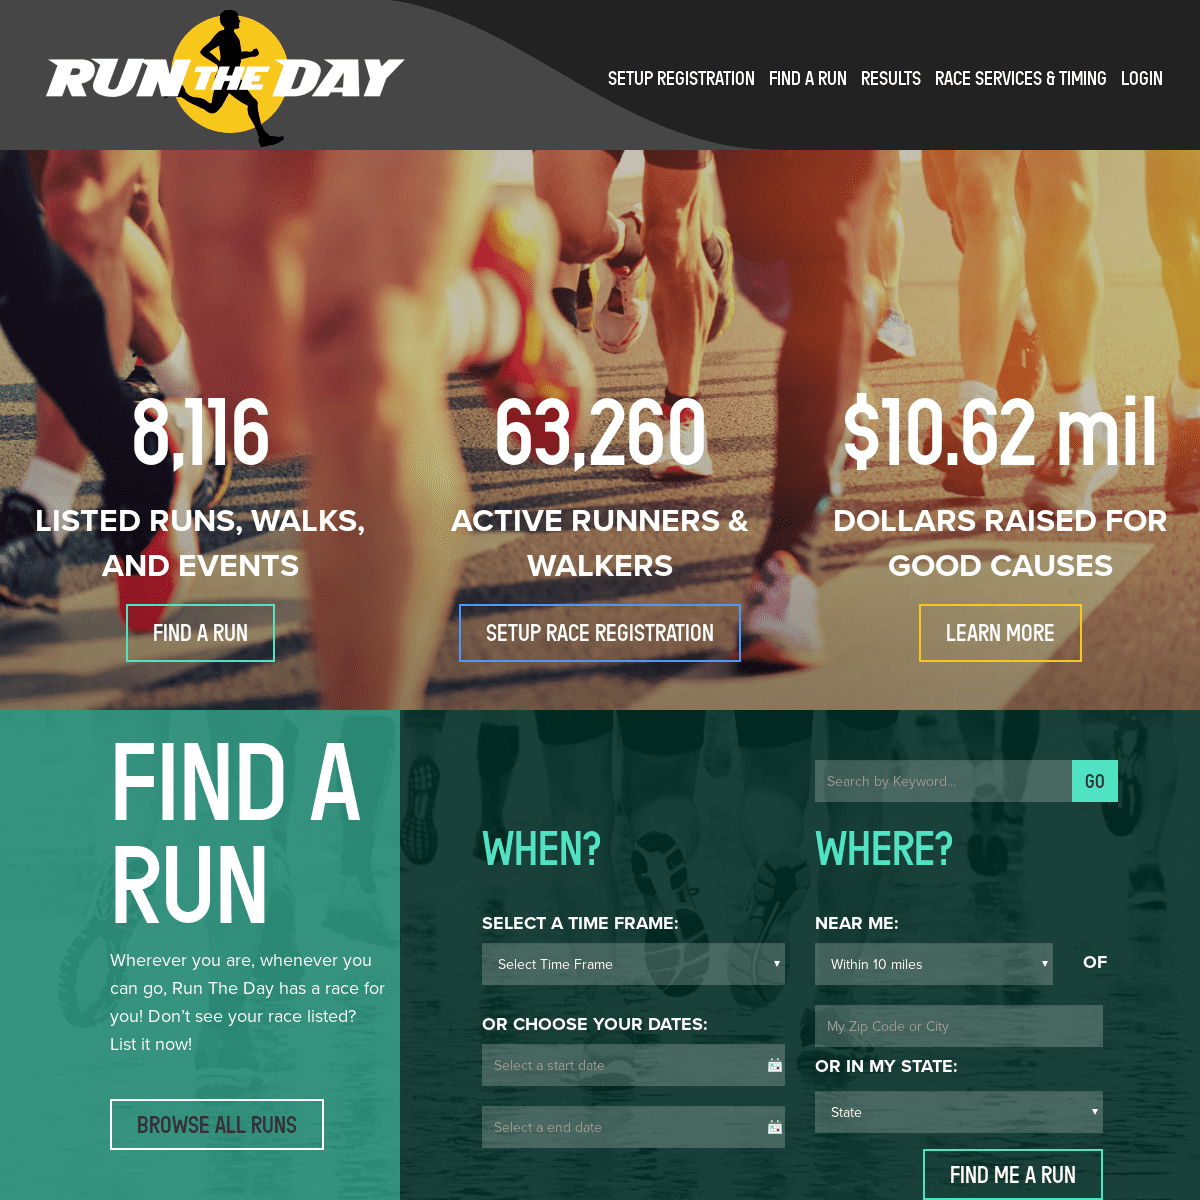 A complete backup of runtheday.com